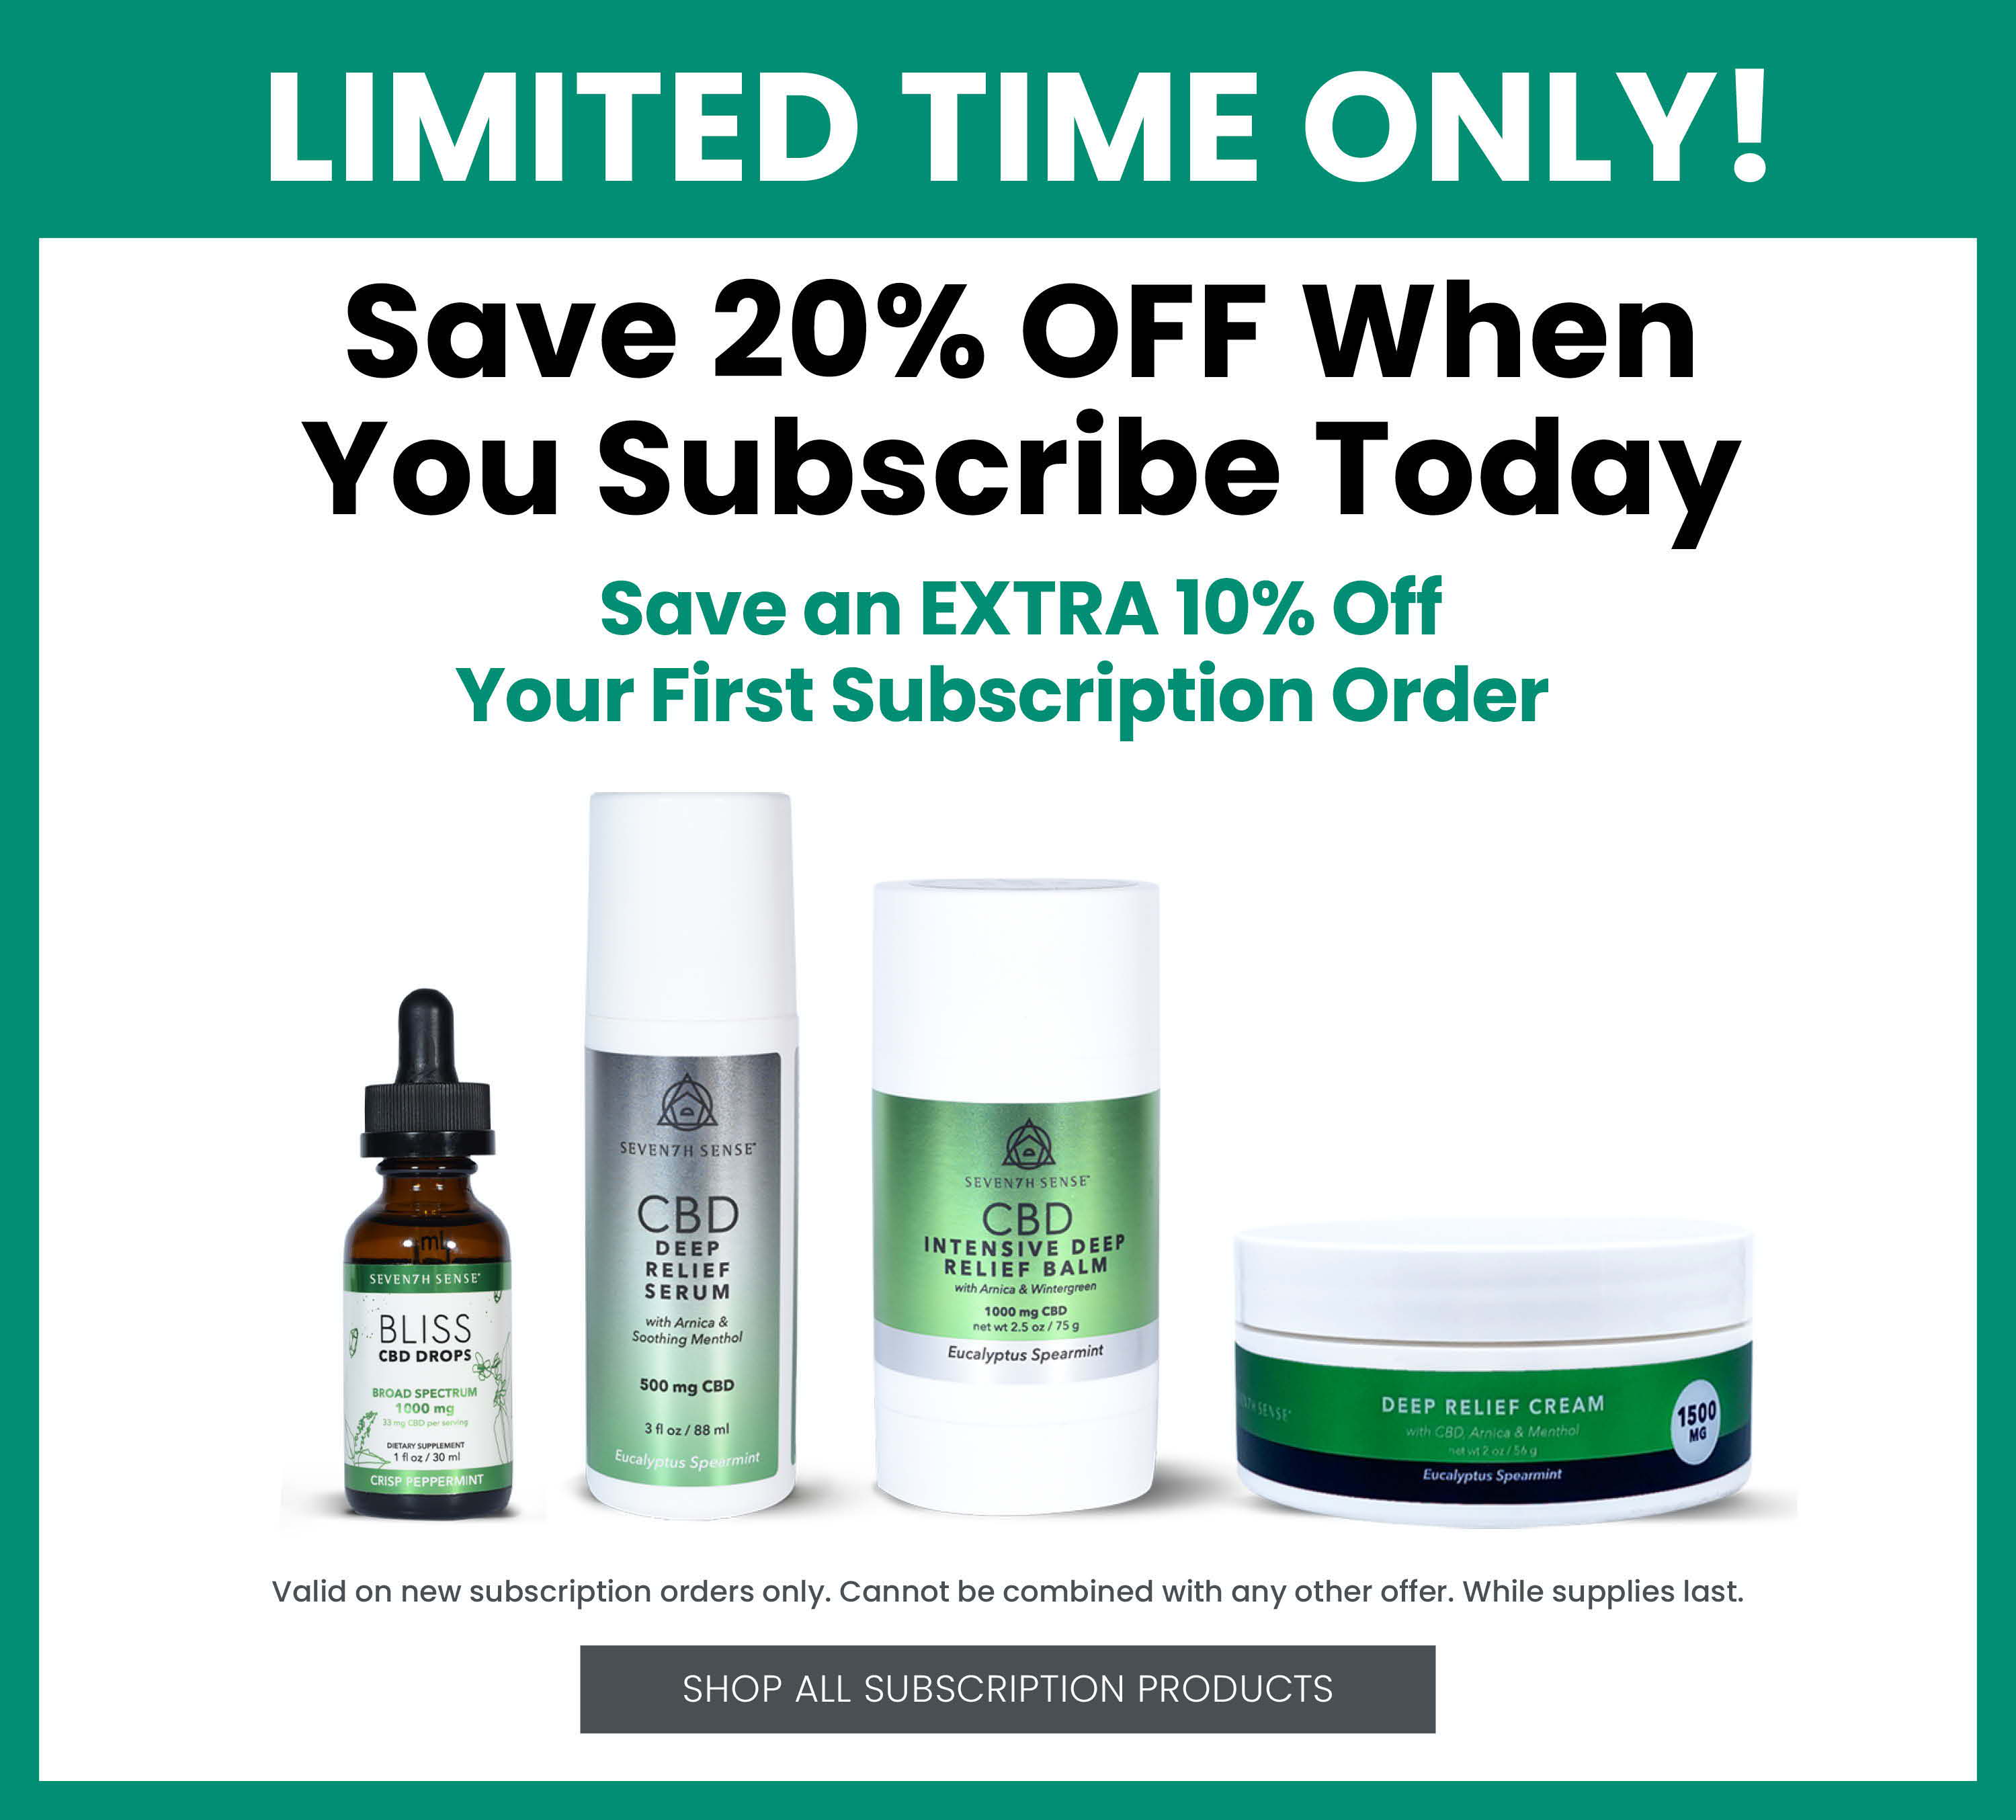 Limited Time Only! Save 20% Off When You Subscribe Today!